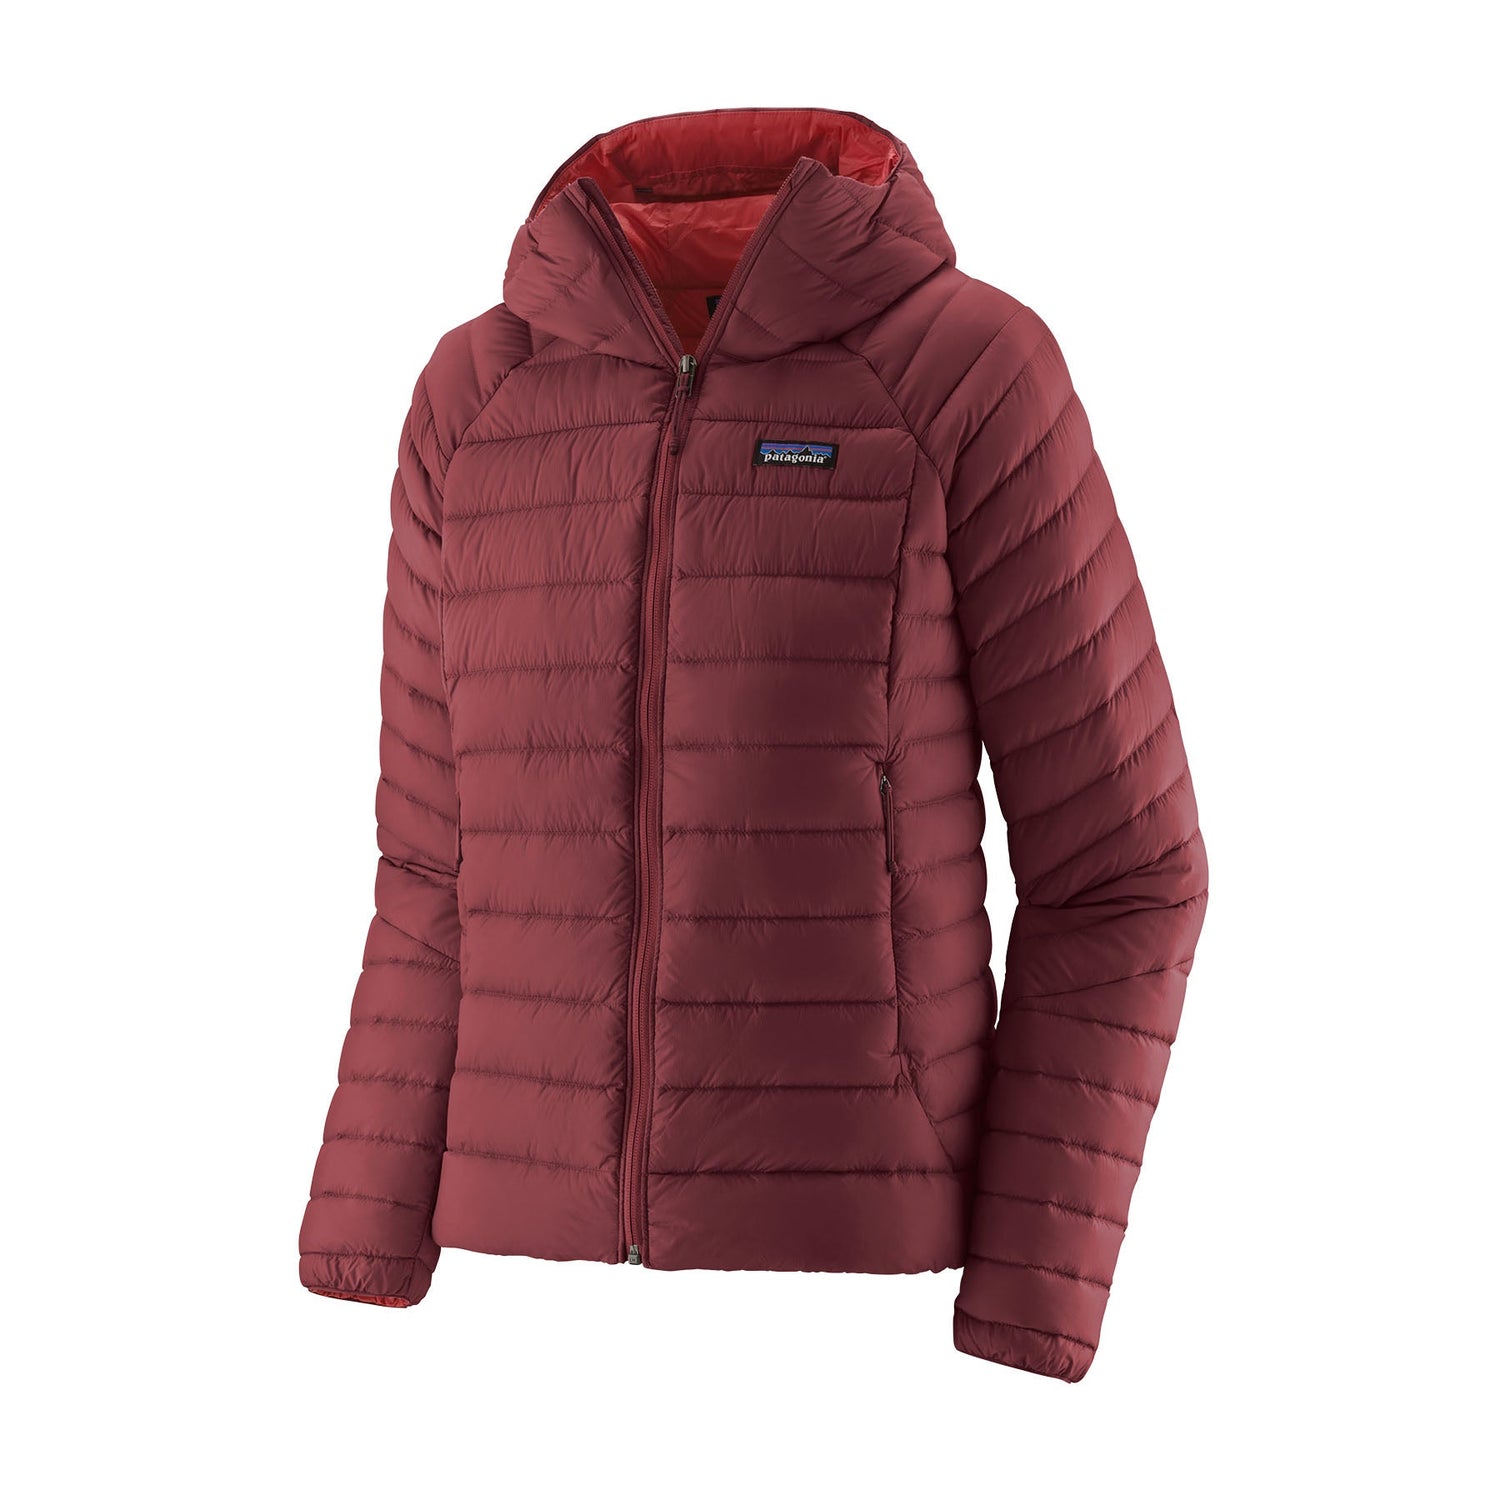 Patagonia - W's Down Sweater Hoody - Recycled Nylon & RDS certified Down - Weekendbee - sustainable sportswear